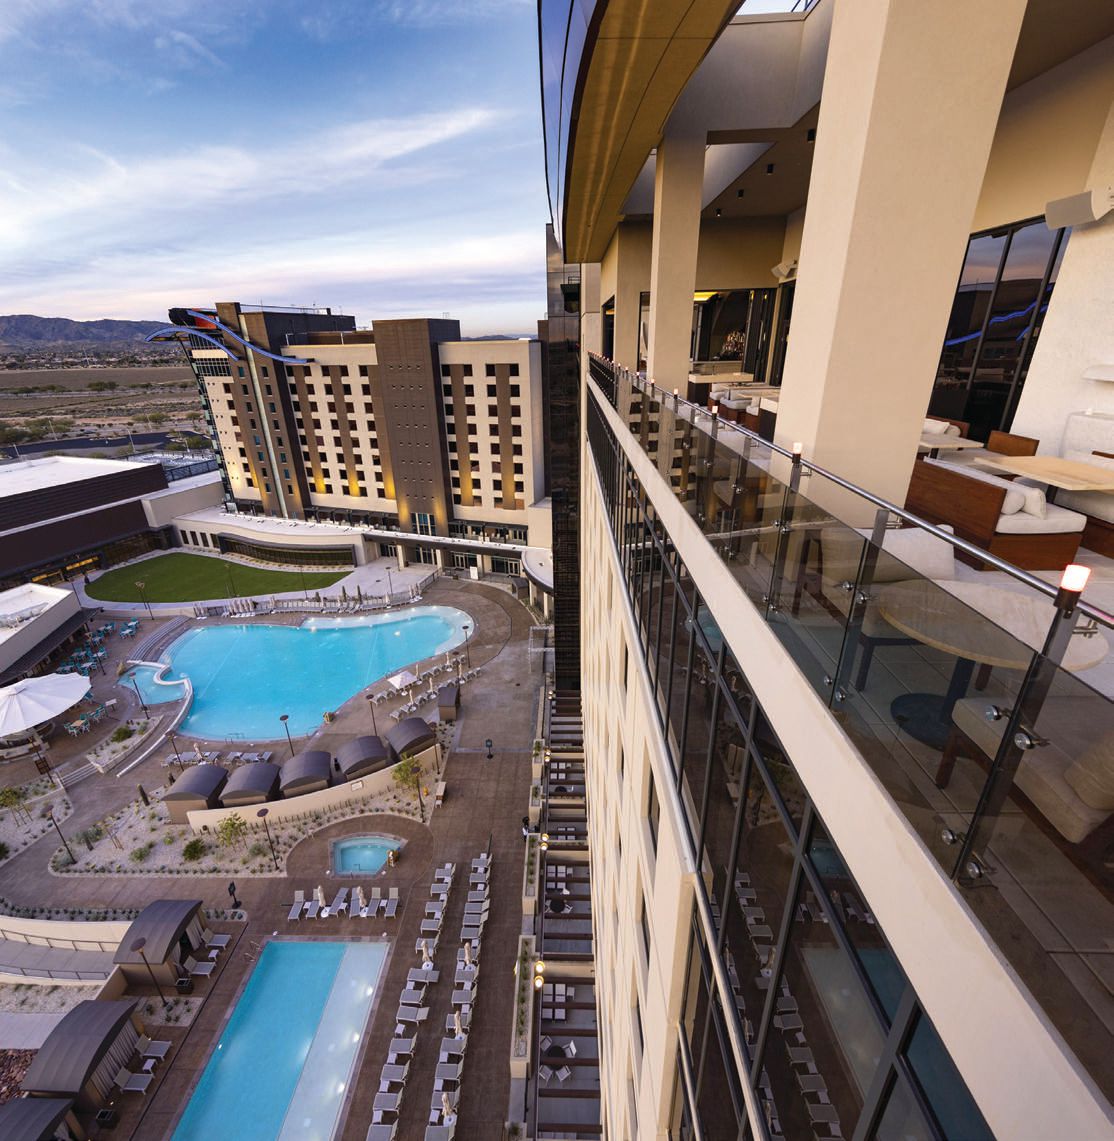 Views of the two new pools at Gila Resorts & Casinos’ Wild Horse Pass PHOTO COURTESY OF GILA RIVER RESORTS & CASINOS